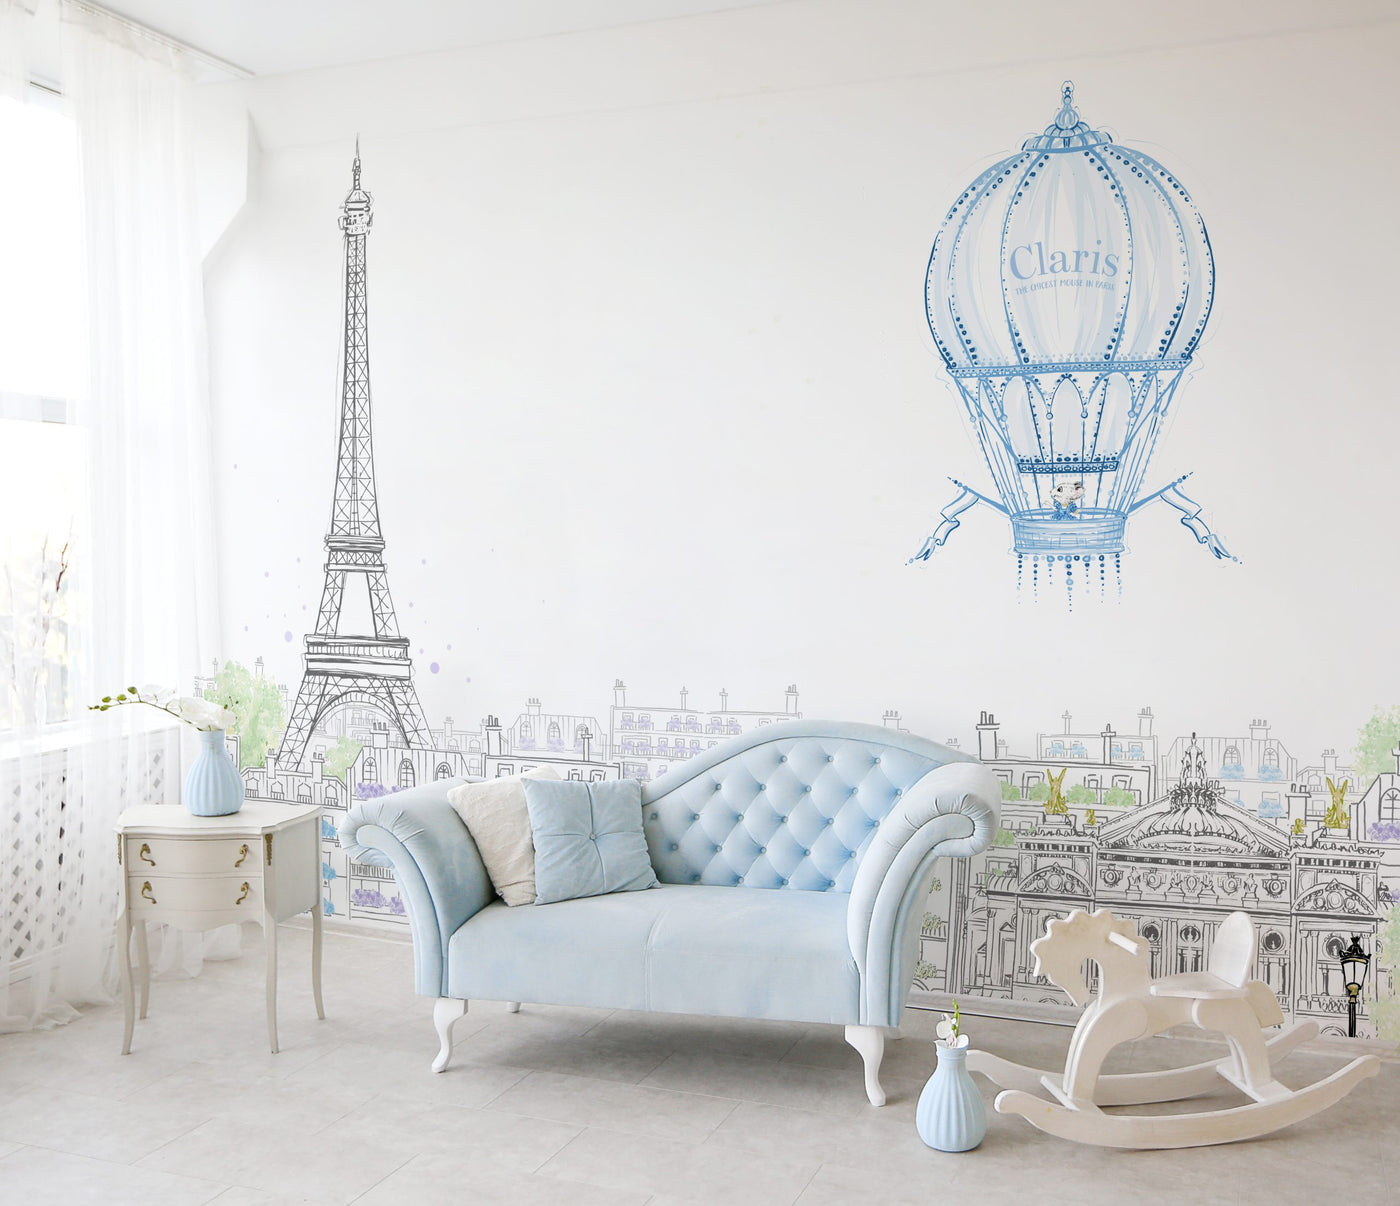 The,Interior,Is,Decorated,In,Pastel,Blue,Tones,With,A